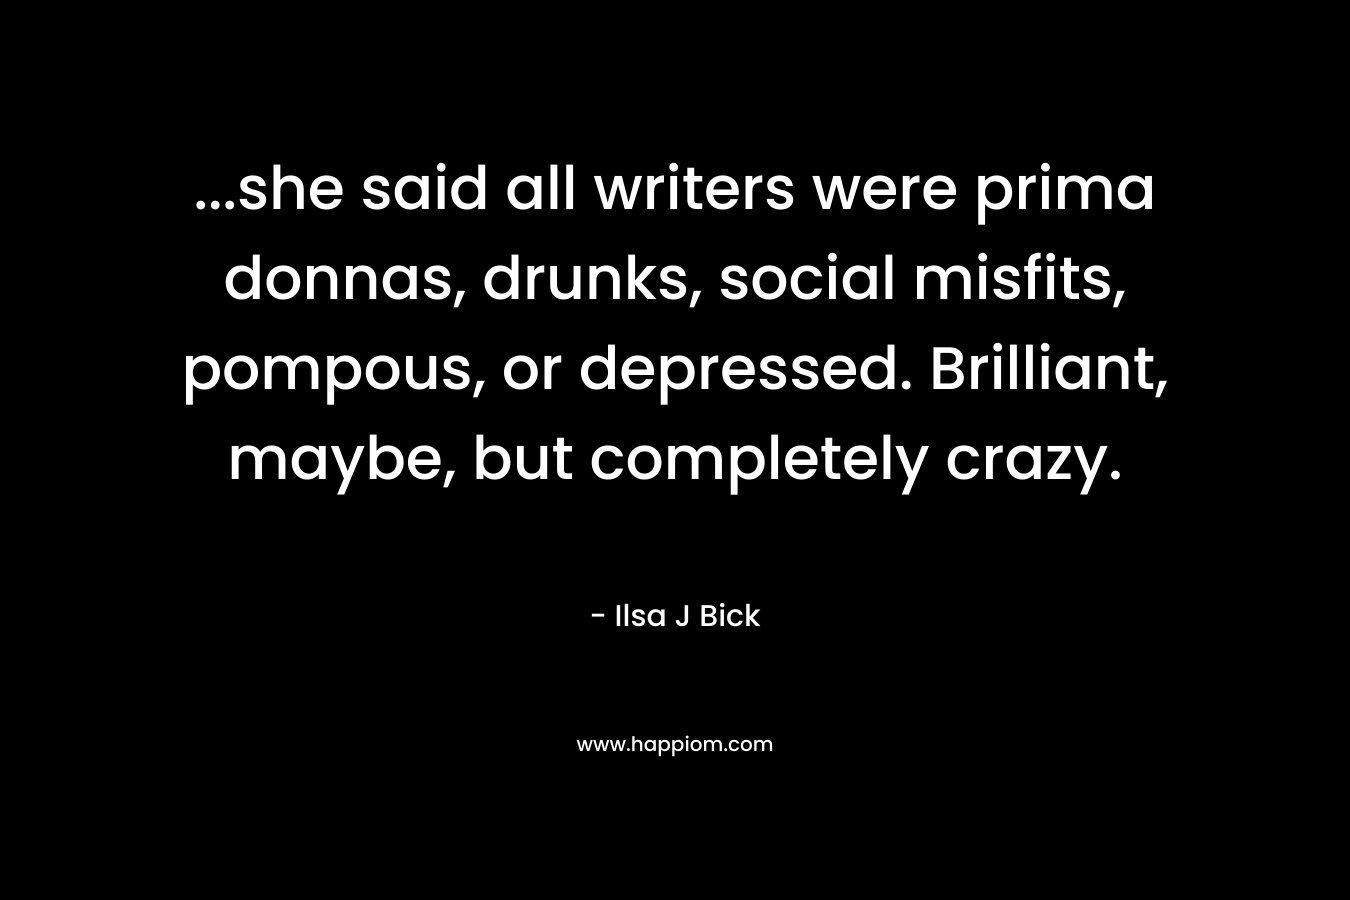 …she said all writers were prima donnas, drunks, social misfits, pompous, or depressed. Brilliant, maybe, but completely crazy. – Ilsa J Bick